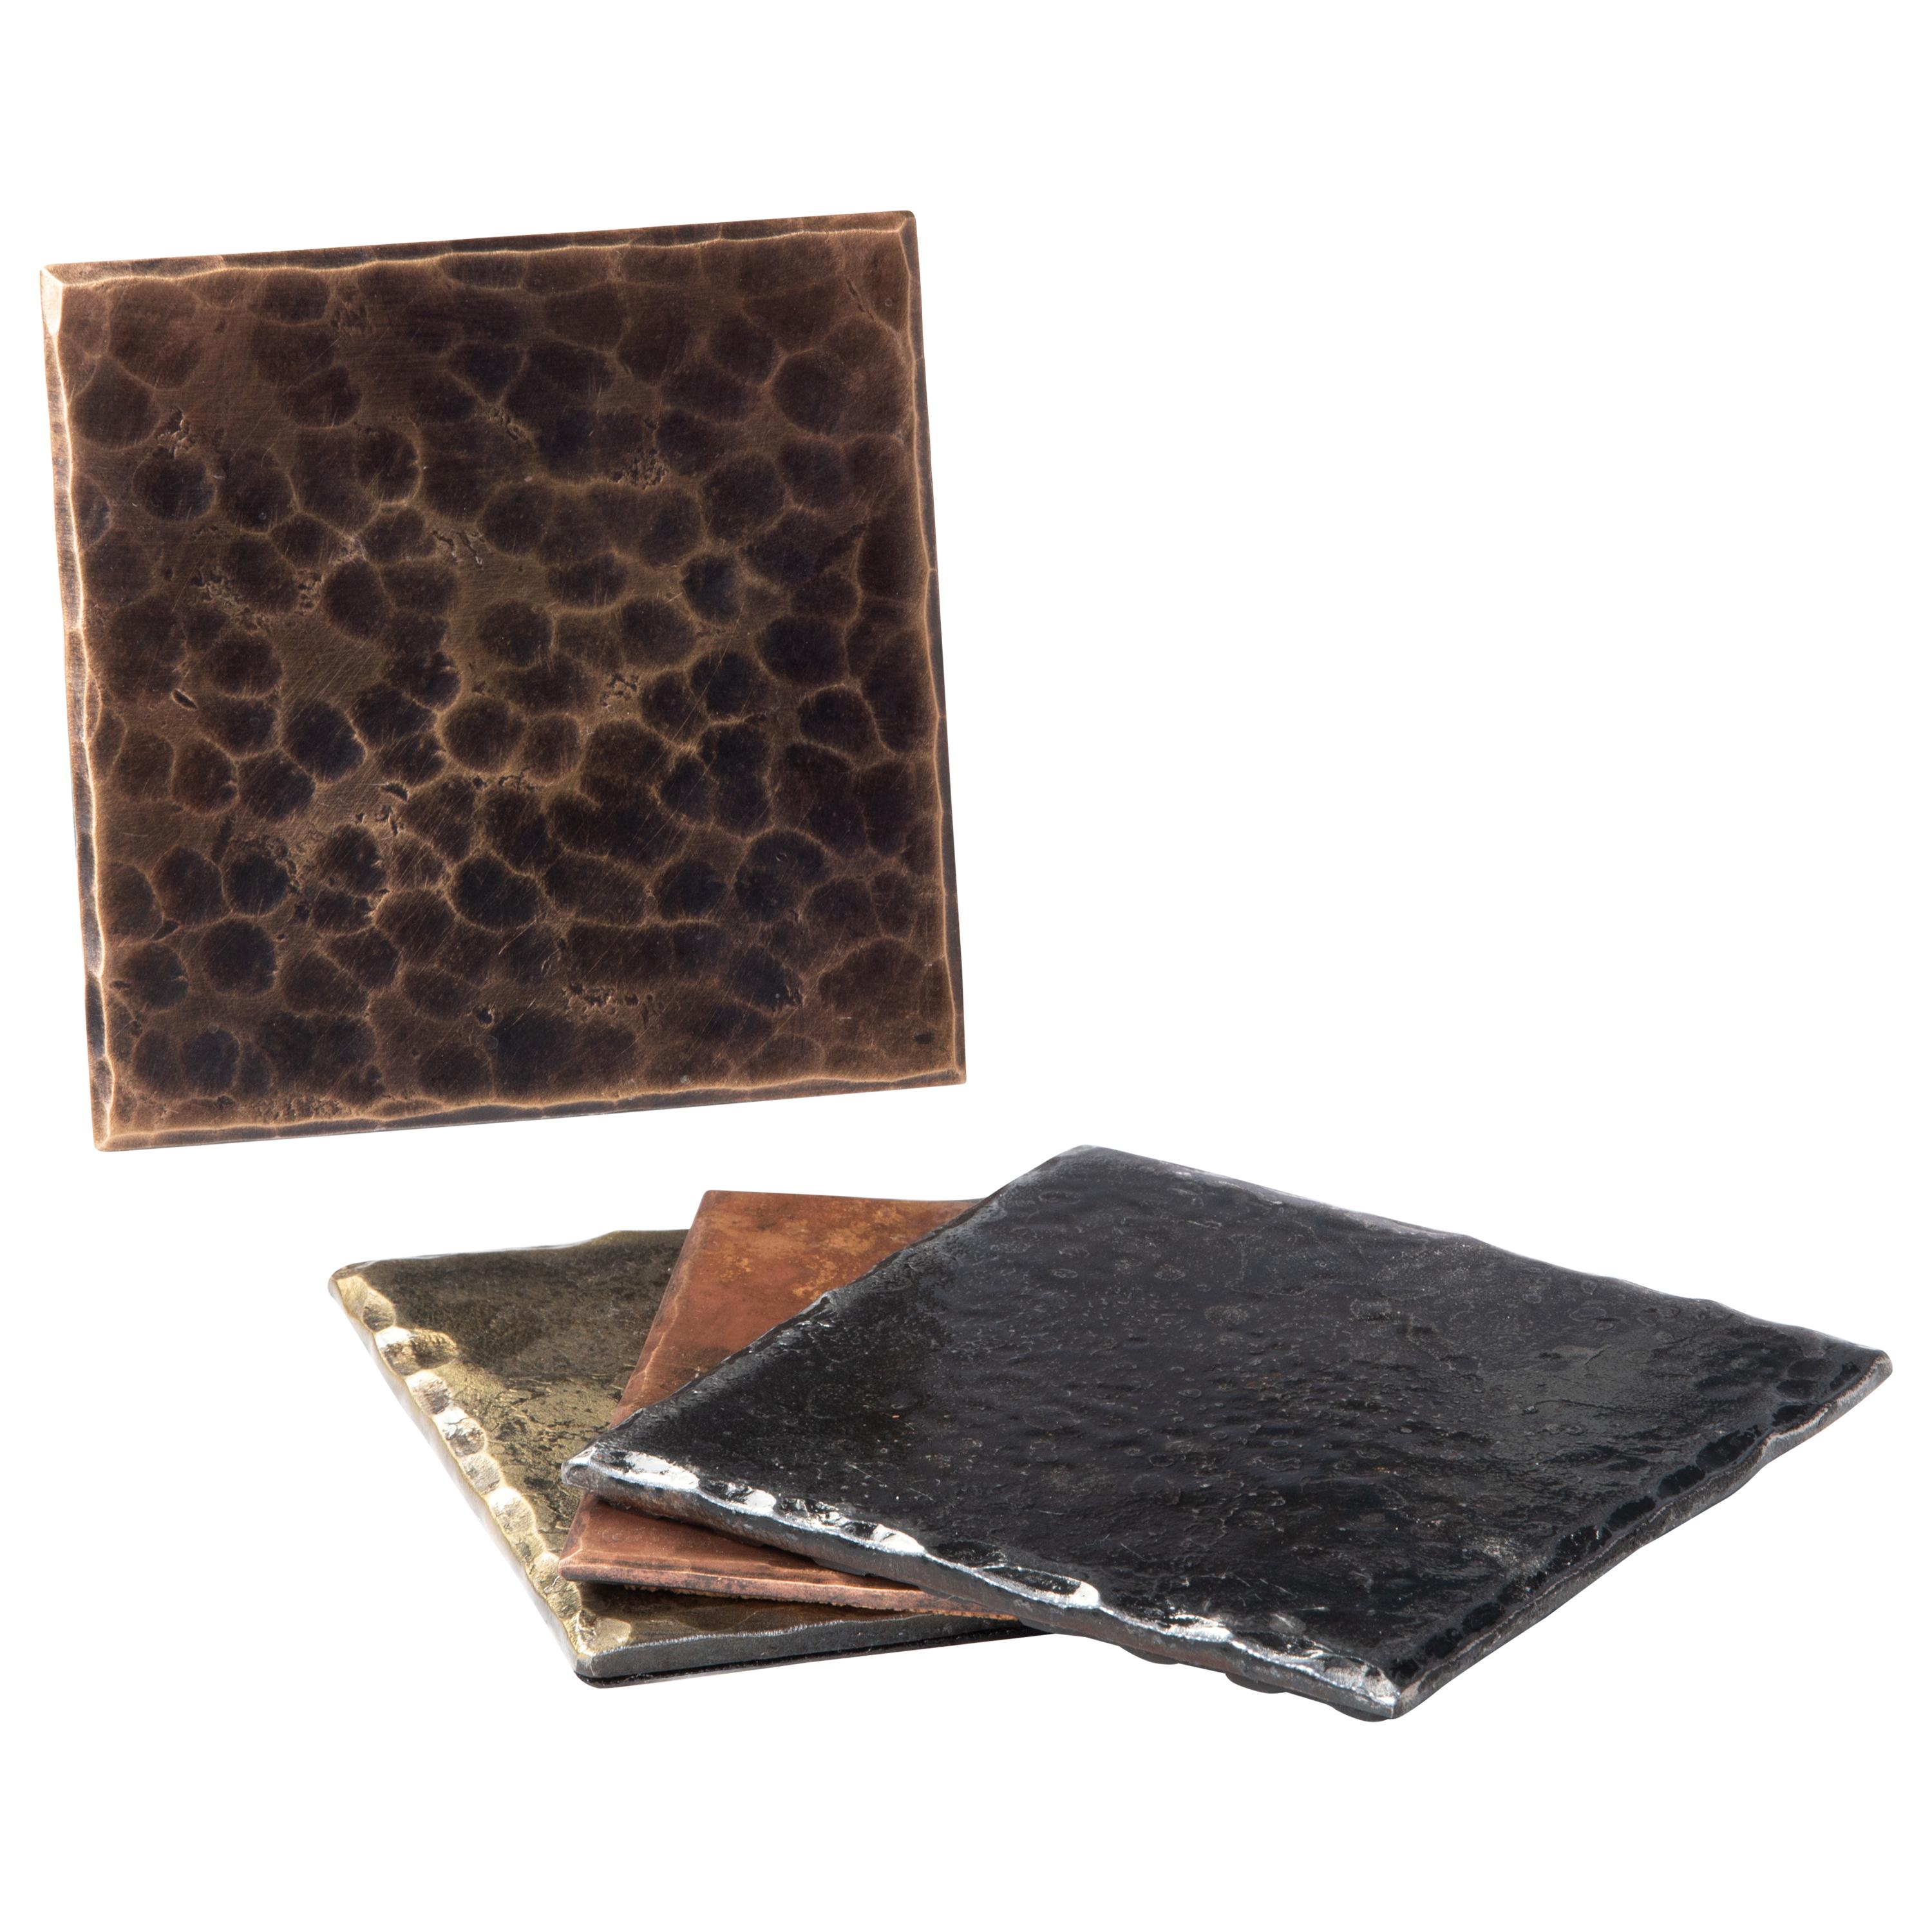 A handcrafted, square coaster made from planished bronze. The edges are hammered and beveled. Patinated and burnished to accentuate the forged details. A glossy clear coat enhances the richness of the finish and texture. Thin cork base. Sold as a